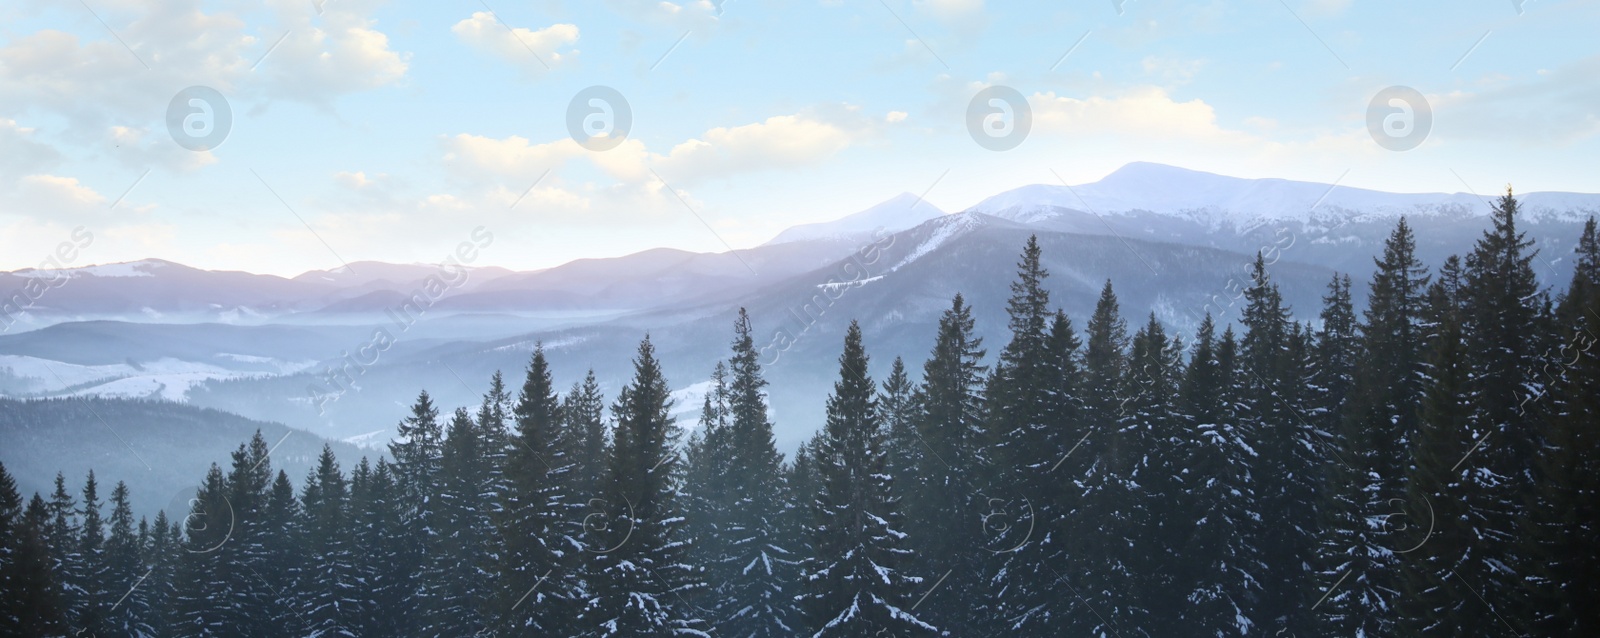 Image of Picturesque view of conifer forest covered with snow on winter day. Banner design